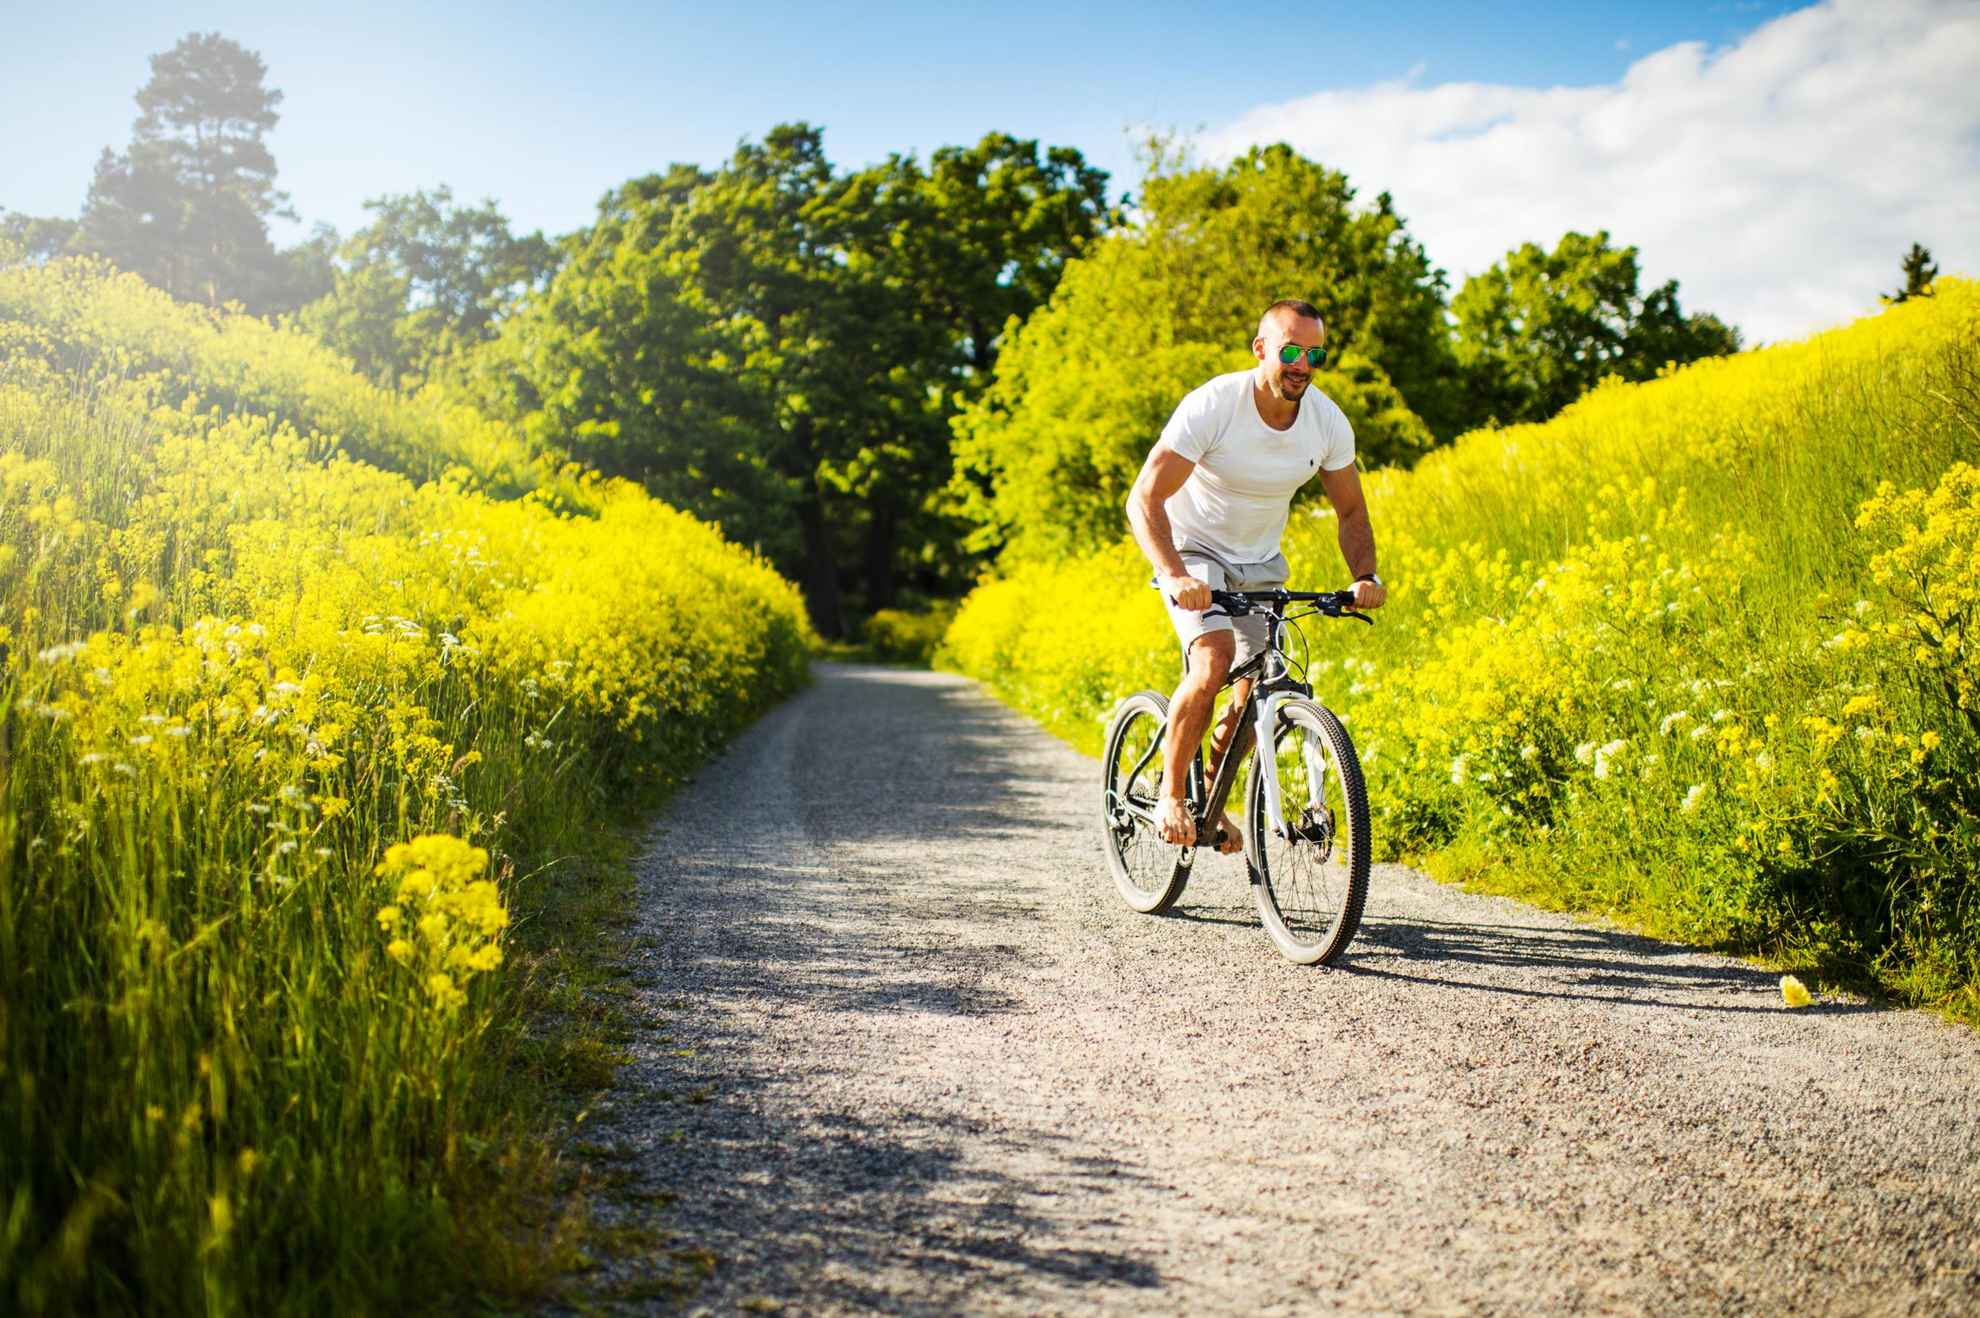 A man rides a bike on a gravel road with fields on both sides of him.